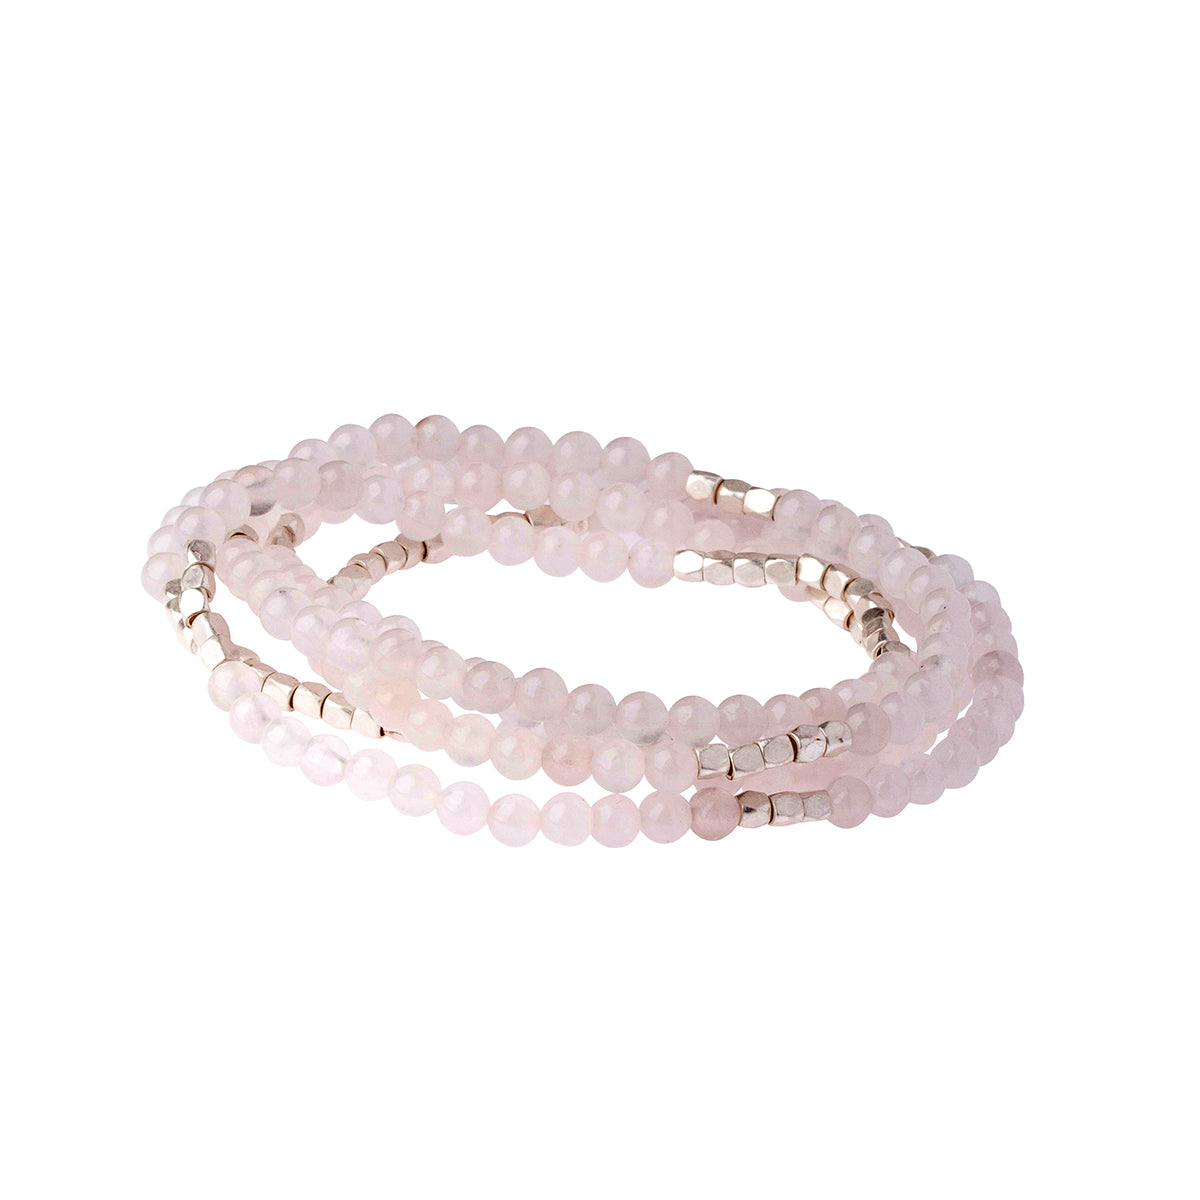 4.5 millimeter rose quarts beads interspersed with silver beads wrapped four times to form a bracelet, shown on a white background.